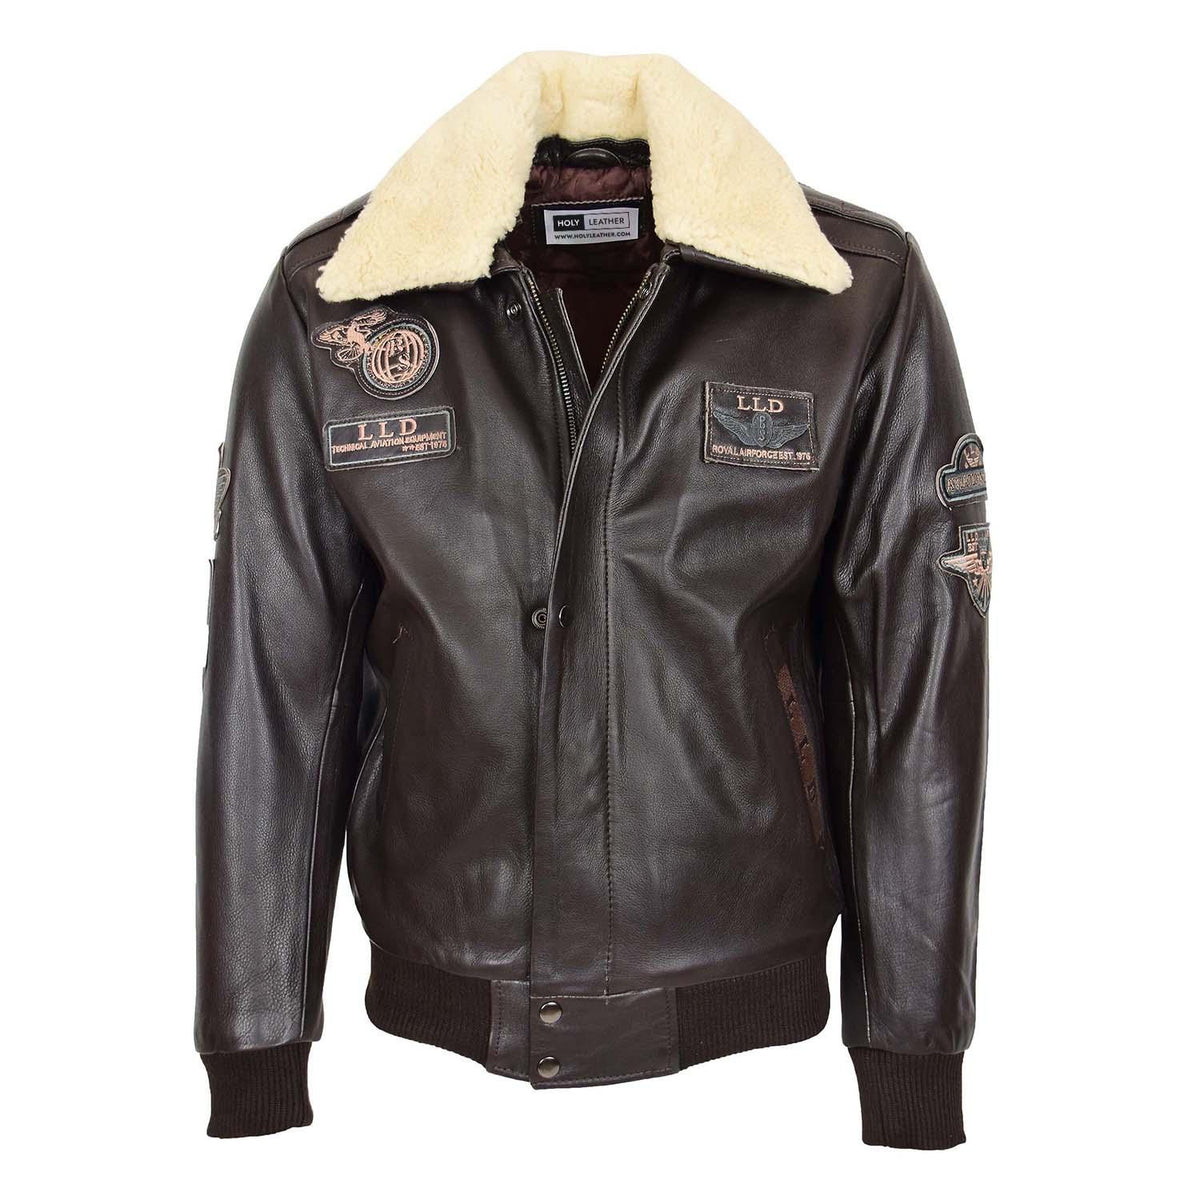 Mens Leather Jacket with Detachable Collar Pilot-N Brown